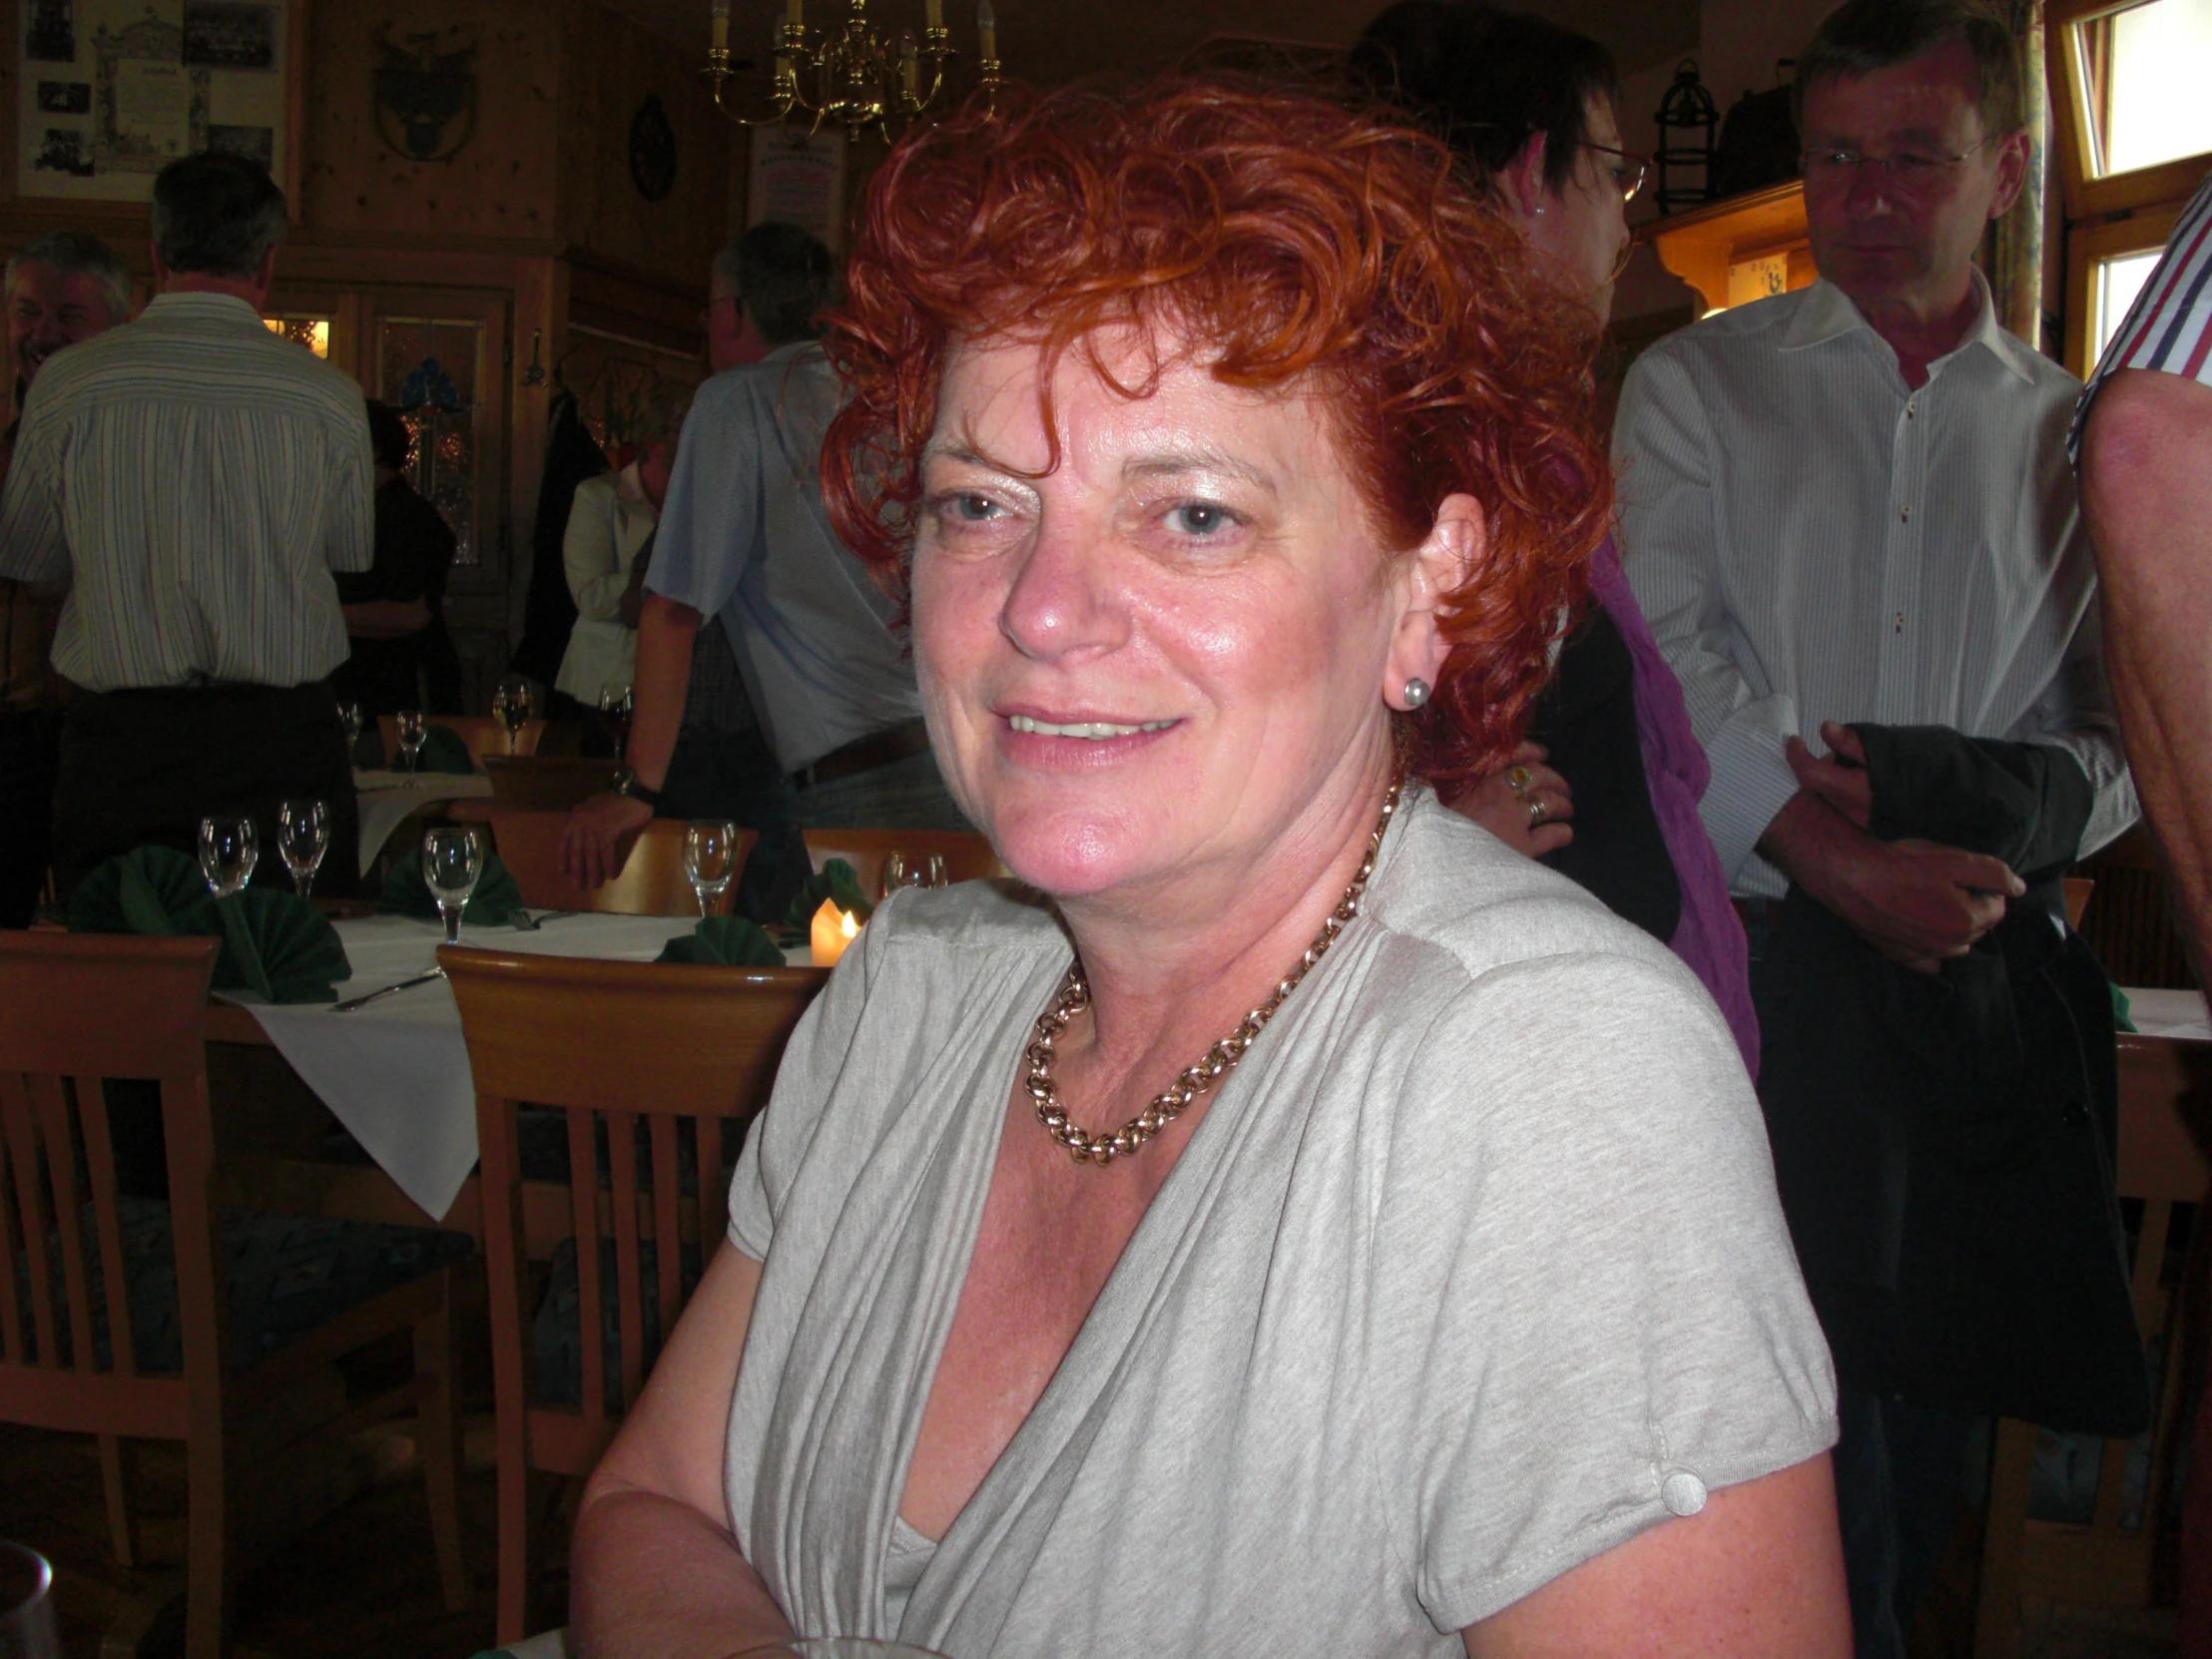 a woman sitting in front of a table smiling for the camera